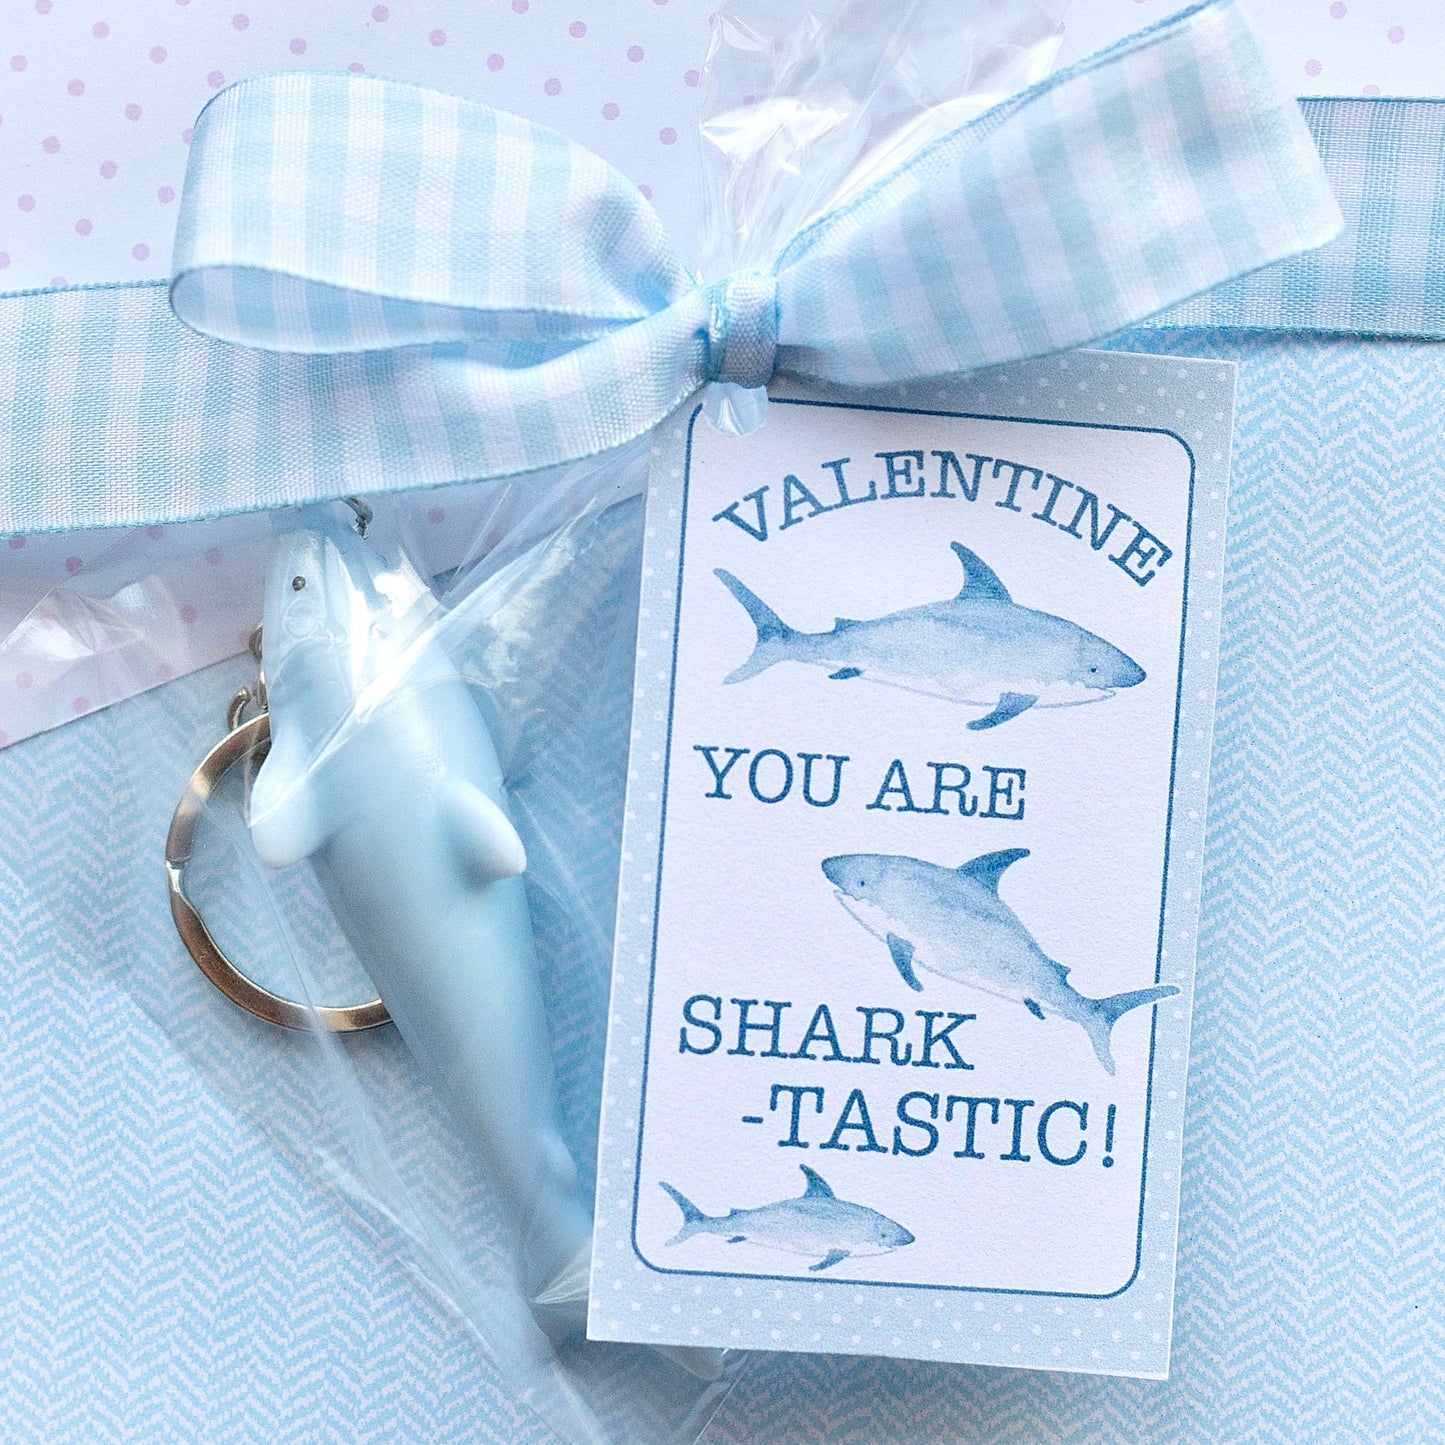 Sharks VDay Cards - add to cart with outfit for FREE